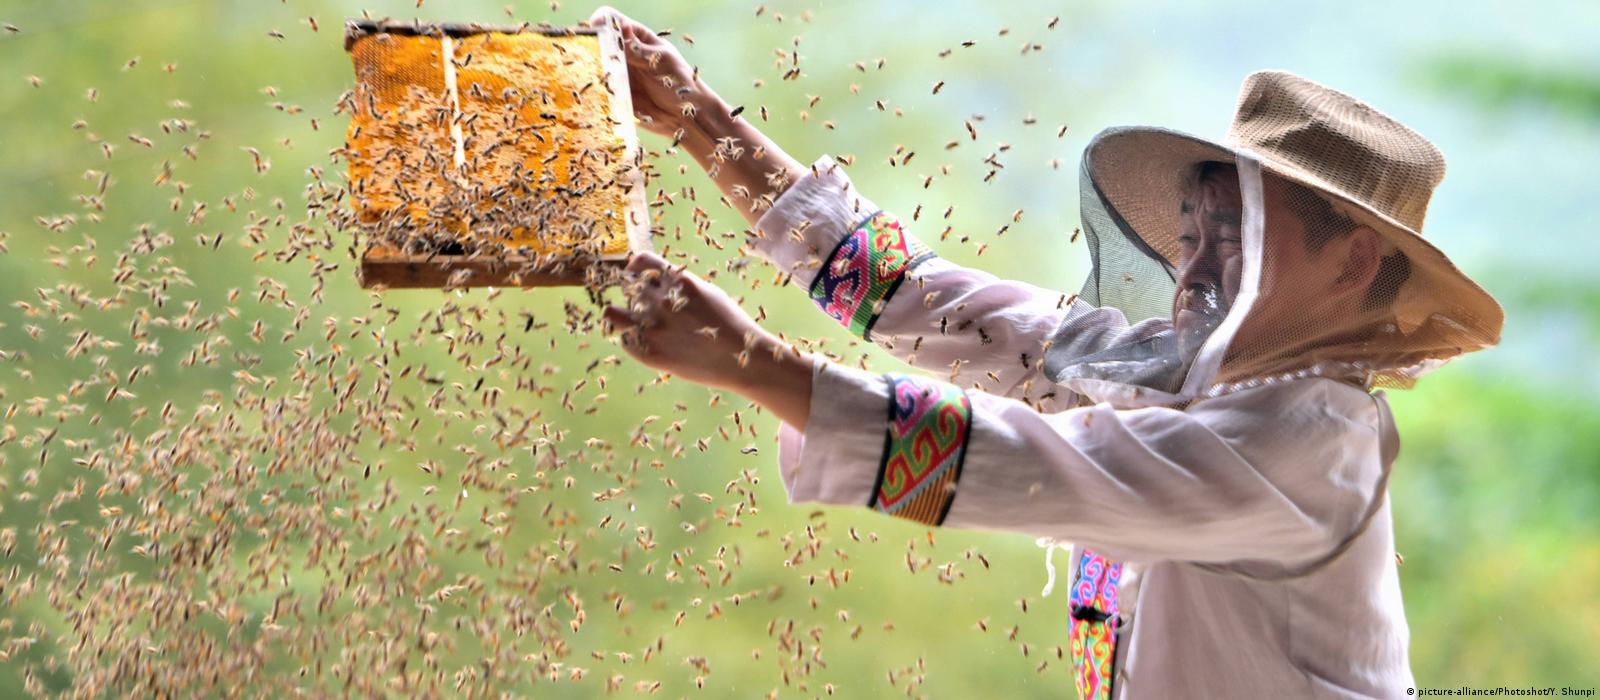 Bee deaths rose last year, so farmers are working harder to